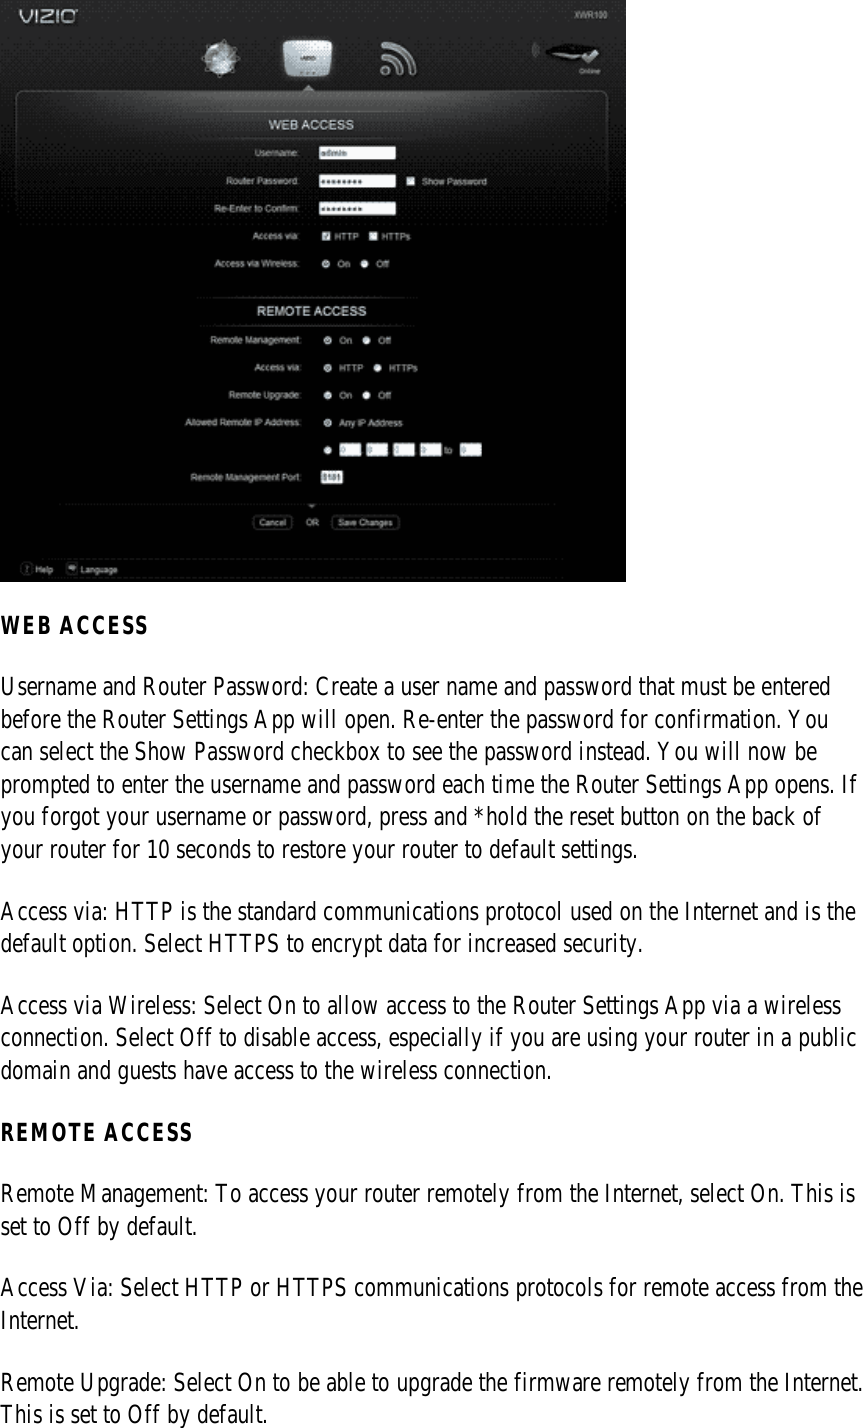  WEB ACCESS Username and Router Password: Create a user name and password that must be entered before the Router Settings App will open. Re-enter the password for confirmation. You can select the Show Password checkbox to see the password instead. You will now be prompted to enter the username and password each time the Router Settings App opens. If you forgot your username or password, press and *hold the reset button on the back of your router for 10 seconds to restore your router to default settings. Access via: HTTP is the standard communications protocol used on the Internet and is the default option. Select HTTPS to encrypt data for increased security. Access via Wireless: Select On to allow access to the Router Settings App via a wireless connection. Select Off to disable access, especially if you are using your router in a public domain and guests have access to the wireless connection. REMOTE ACCESS Remote Management: To access your router remotely from the Internet, select On. This is set to Off by default. Access Via: Select HTTP or HTTPS communications protocols for remote access from the Internet. Remote Upgrade: Select On to be able to upgrade the firmware remotely from the Internet. This is set to Off by default. 